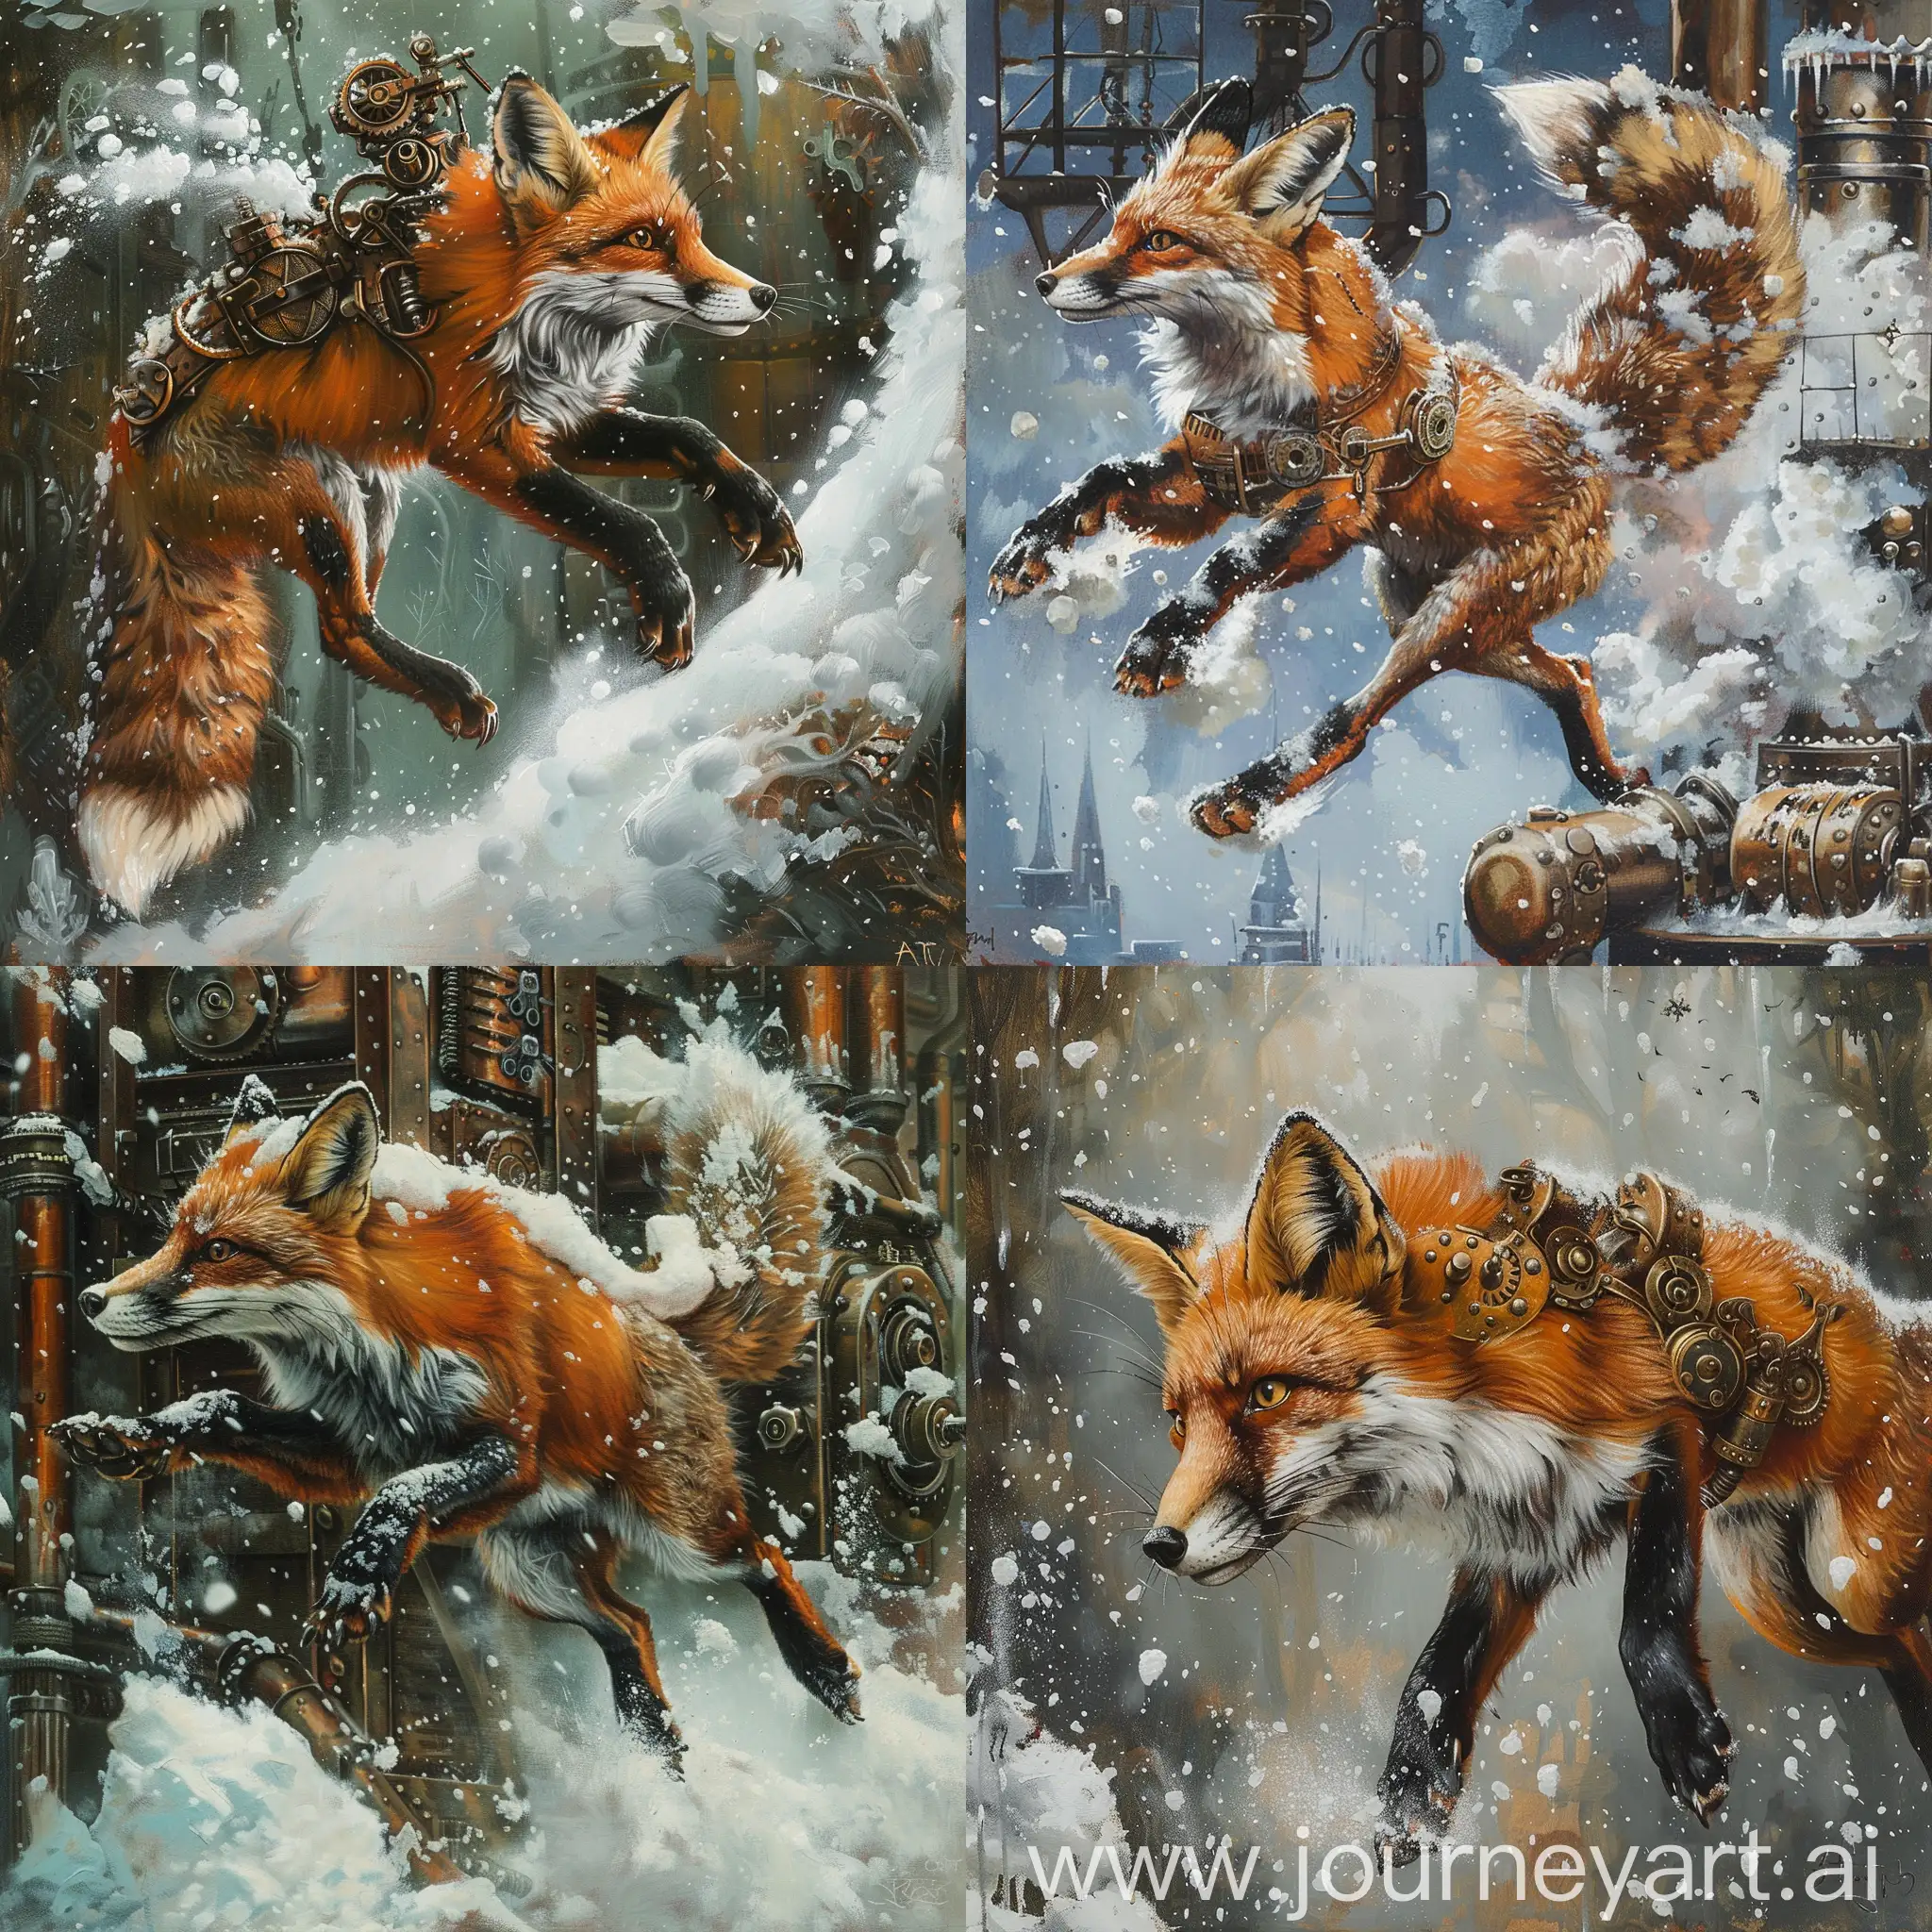 A fox jumps into the snow, a steampunk painting